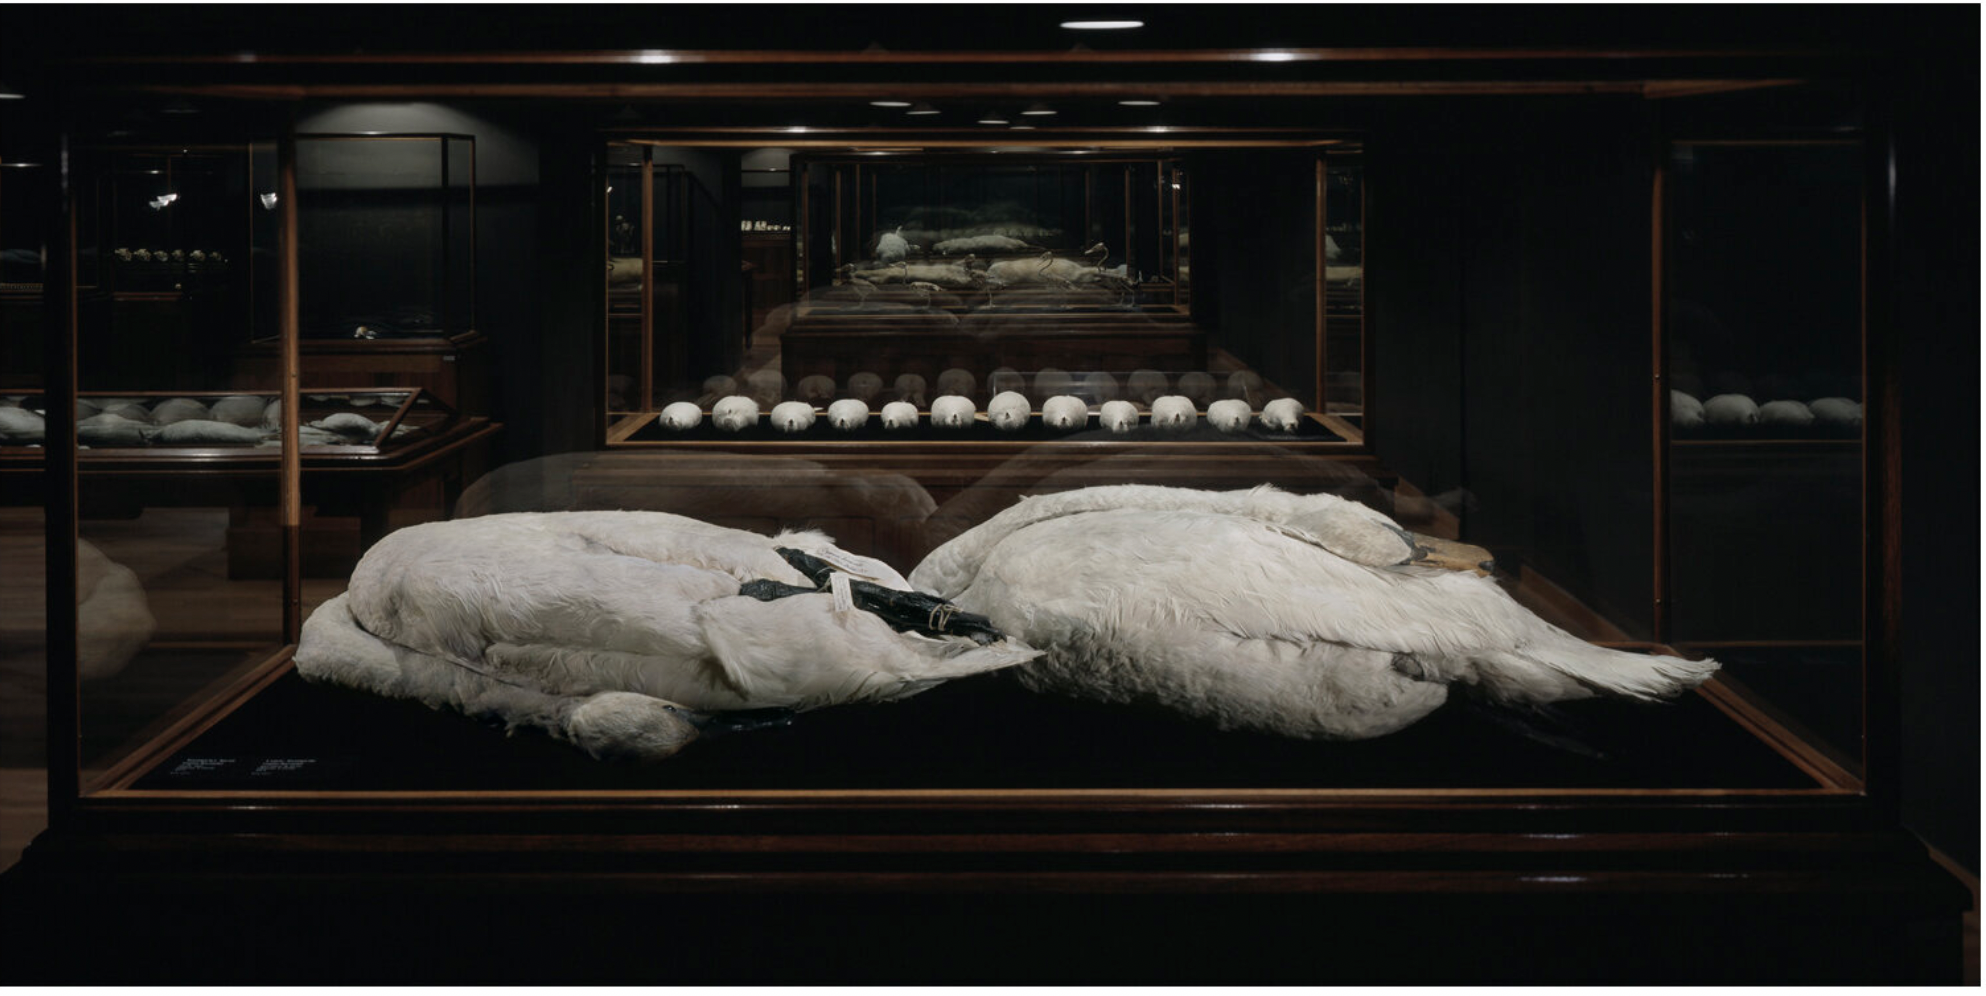 The bodies of two white swans are laid end-to-end in a glass case. Their necks are folded back along their bodies.